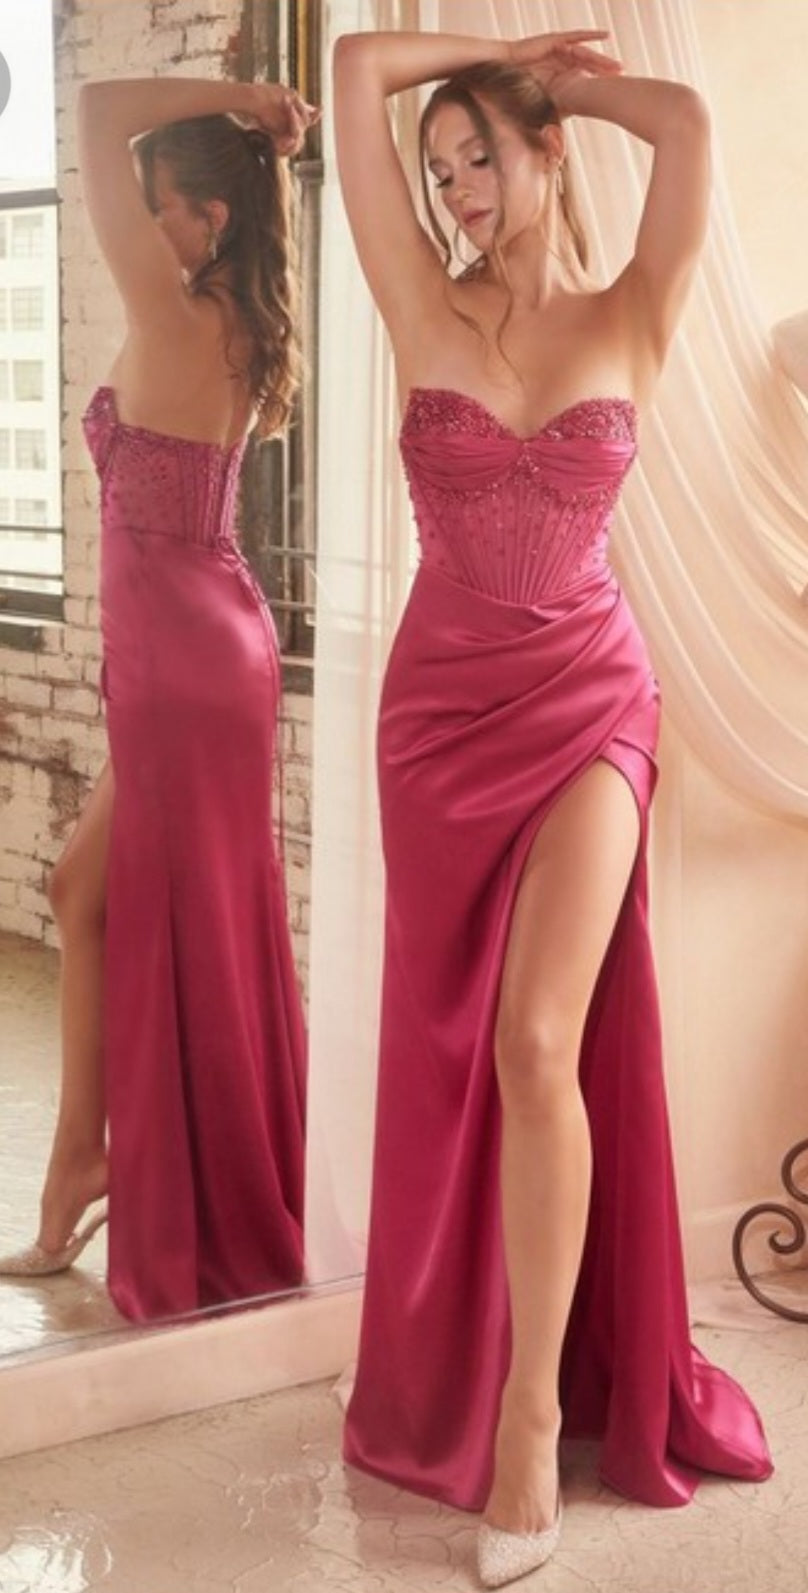 DAISY EMBELLISHED SATIN CORSET GOWN